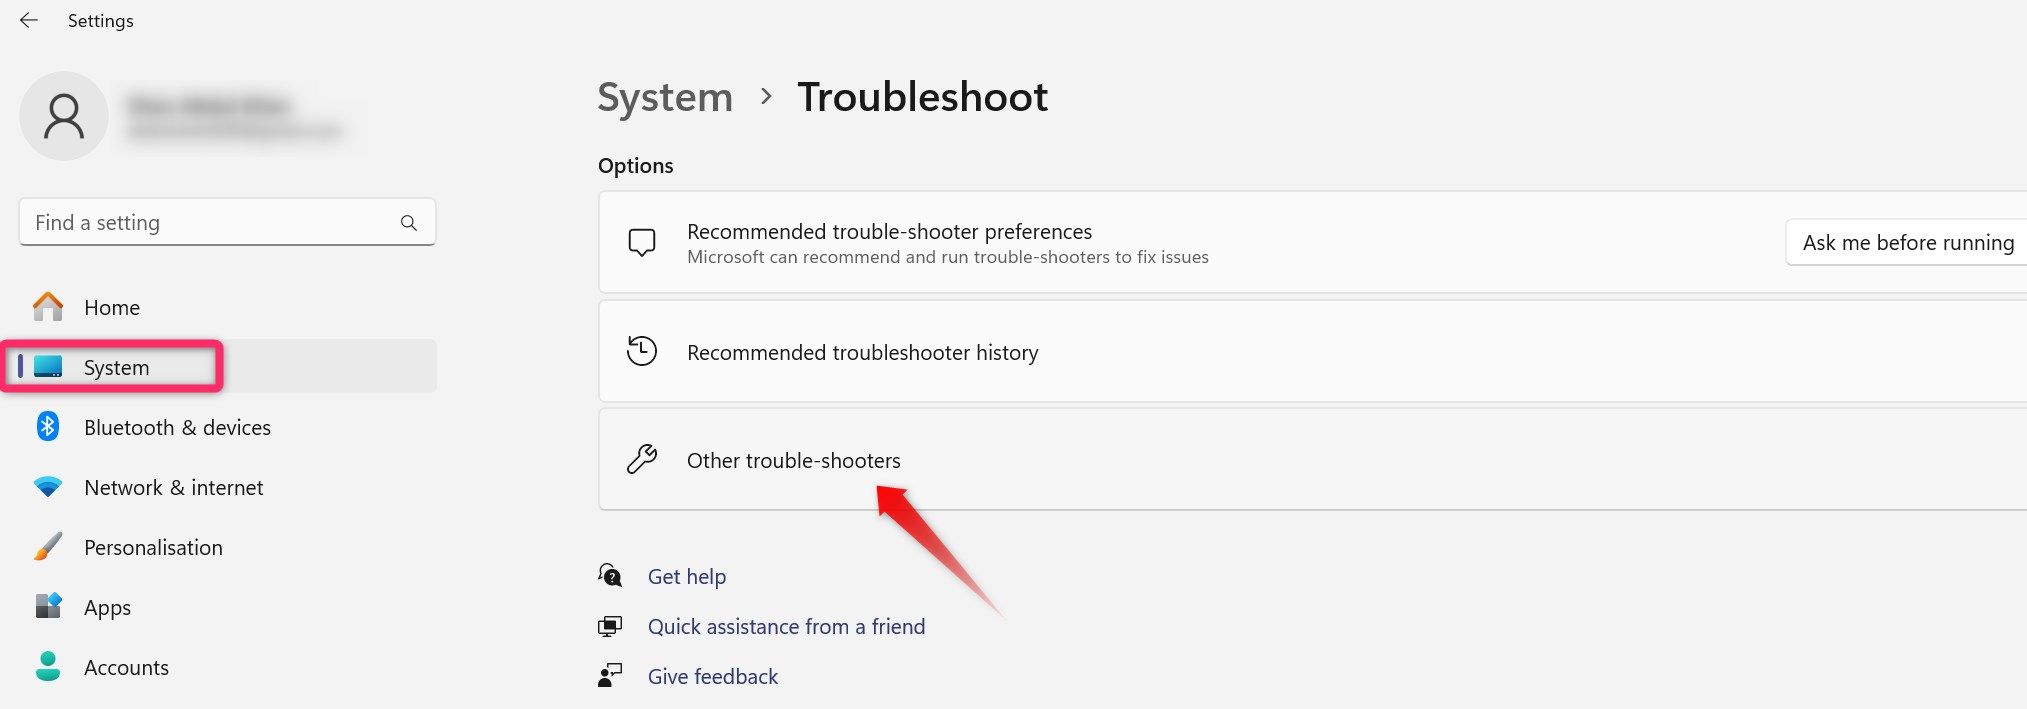 Opening other troubleshooters settings on windows